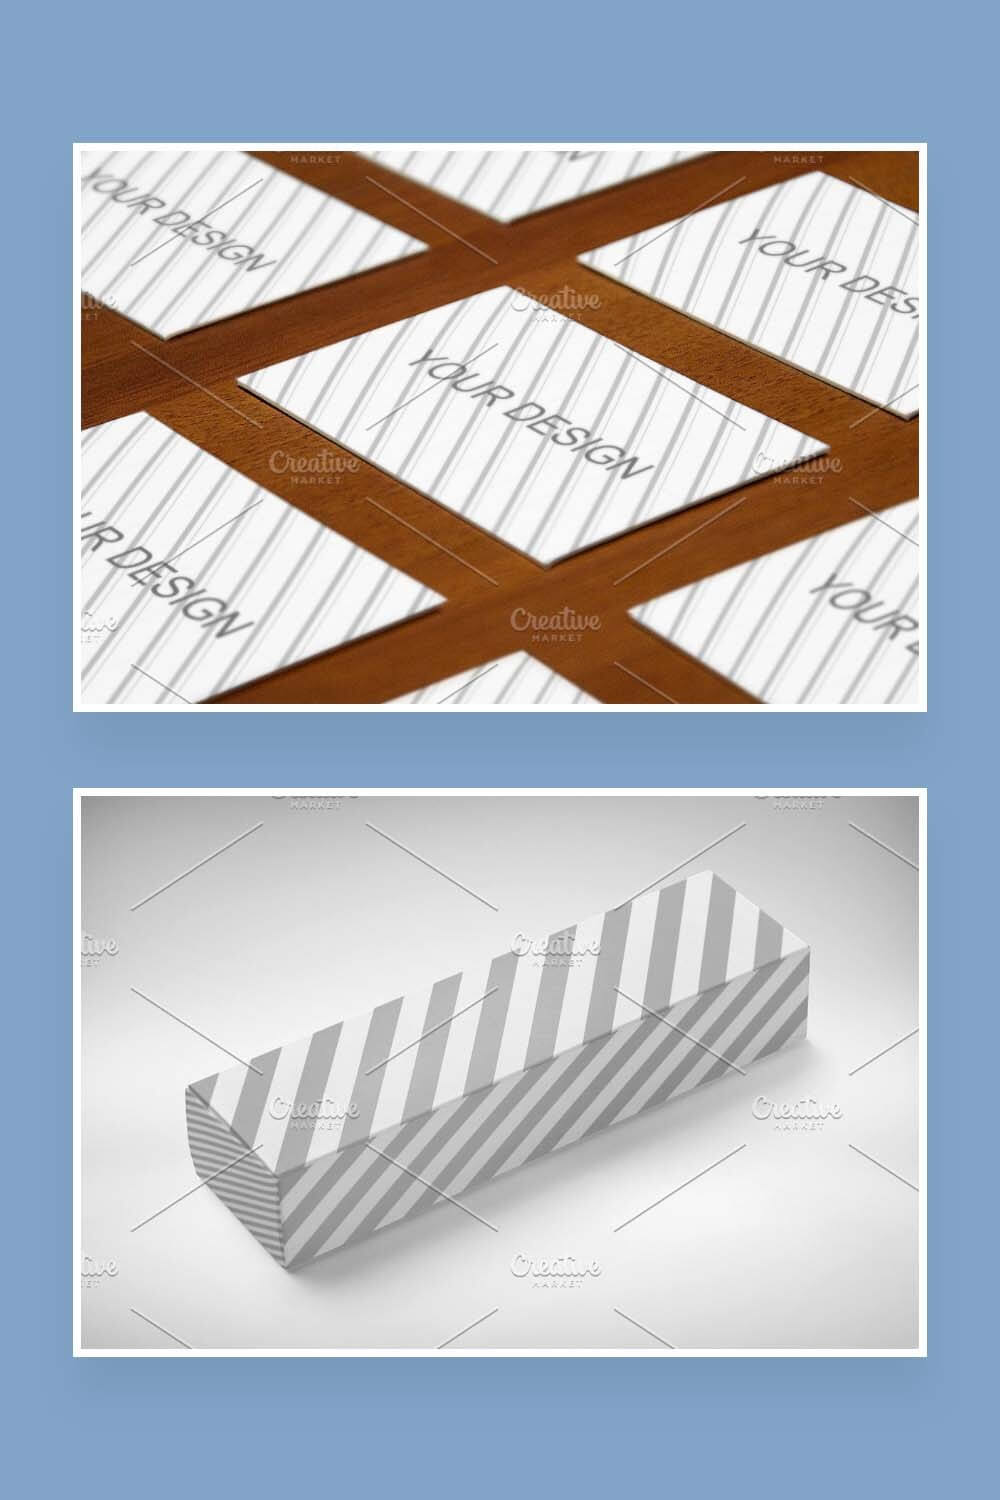 Simple striped patterns, in two pictures, the first on the envelopes, the second striped box.